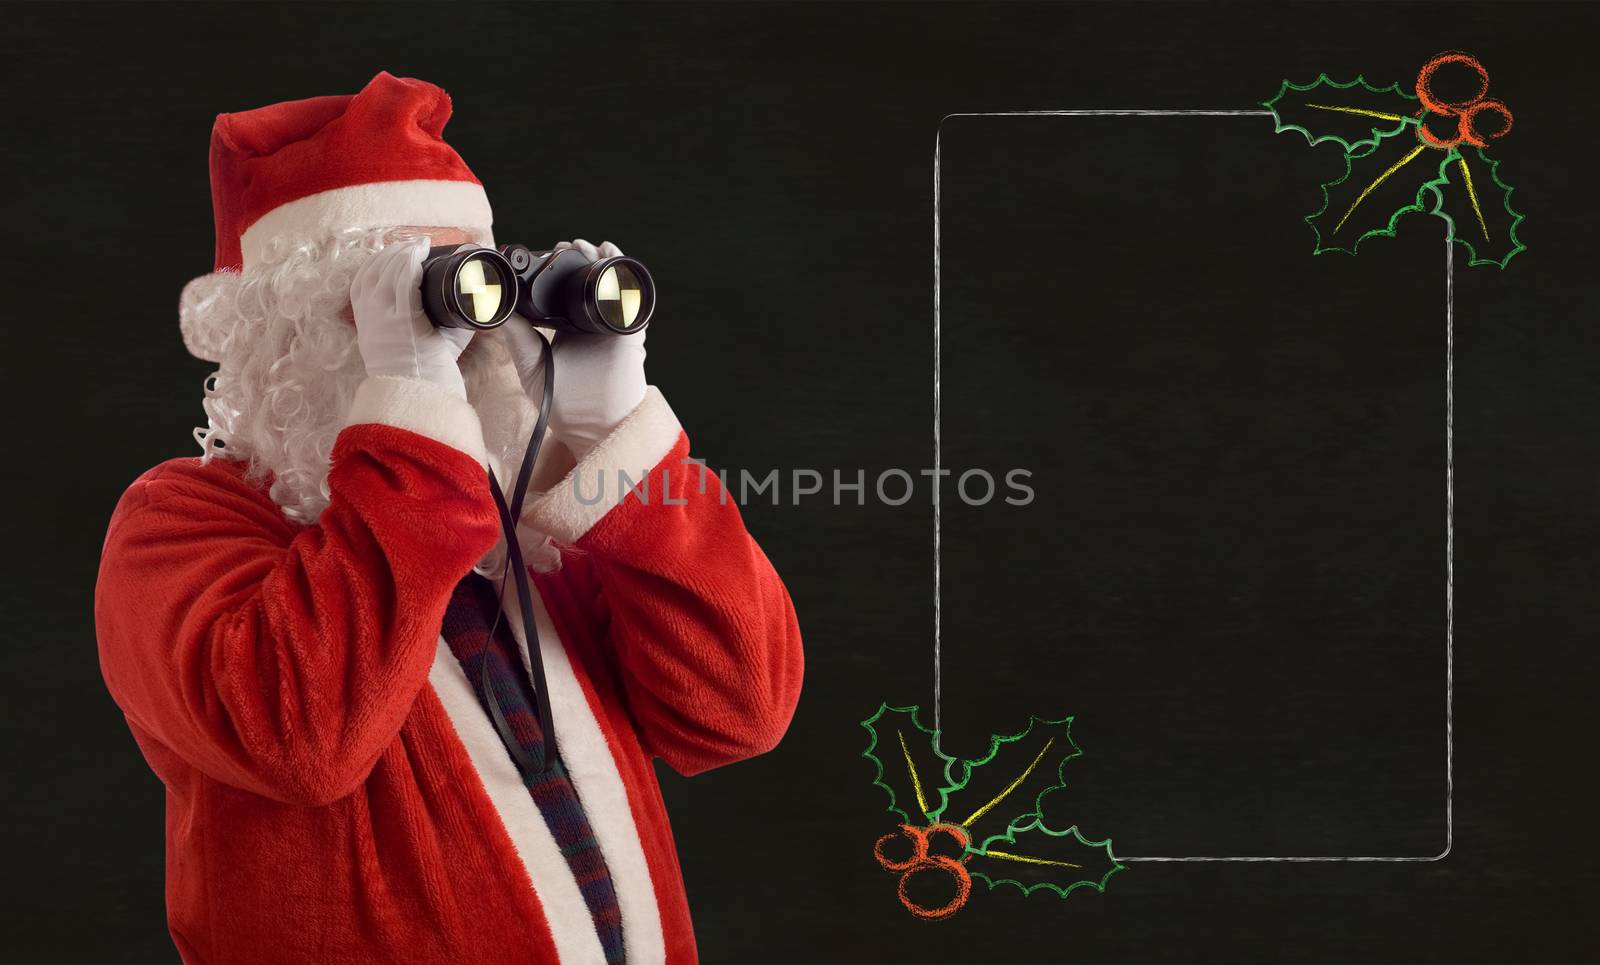 Father Christmas looking at the future sales strategy notes with binoculars on backboard background